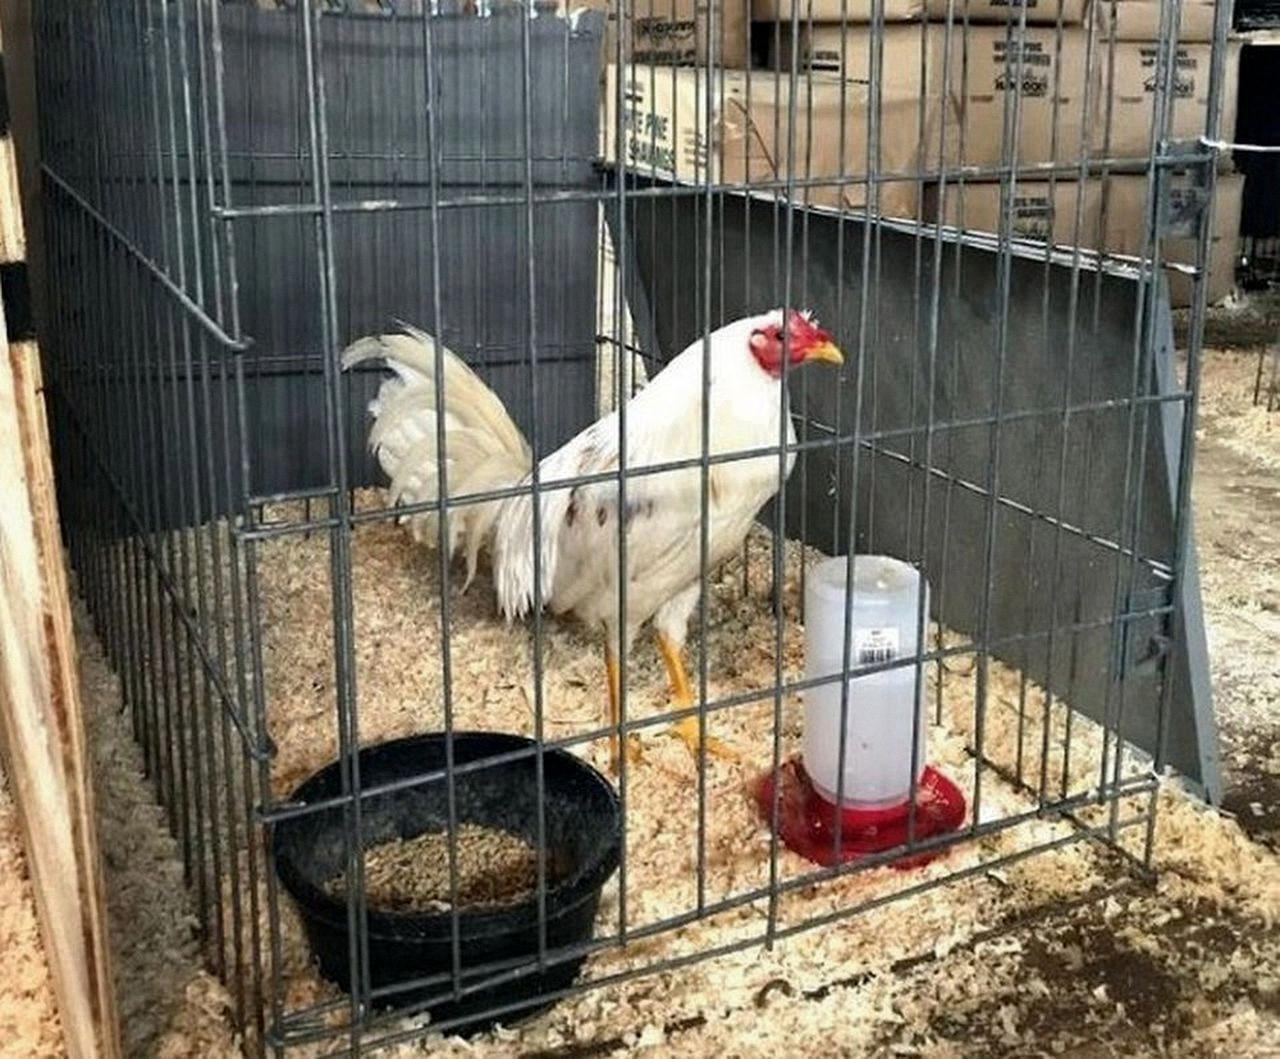 do roosters have dicks